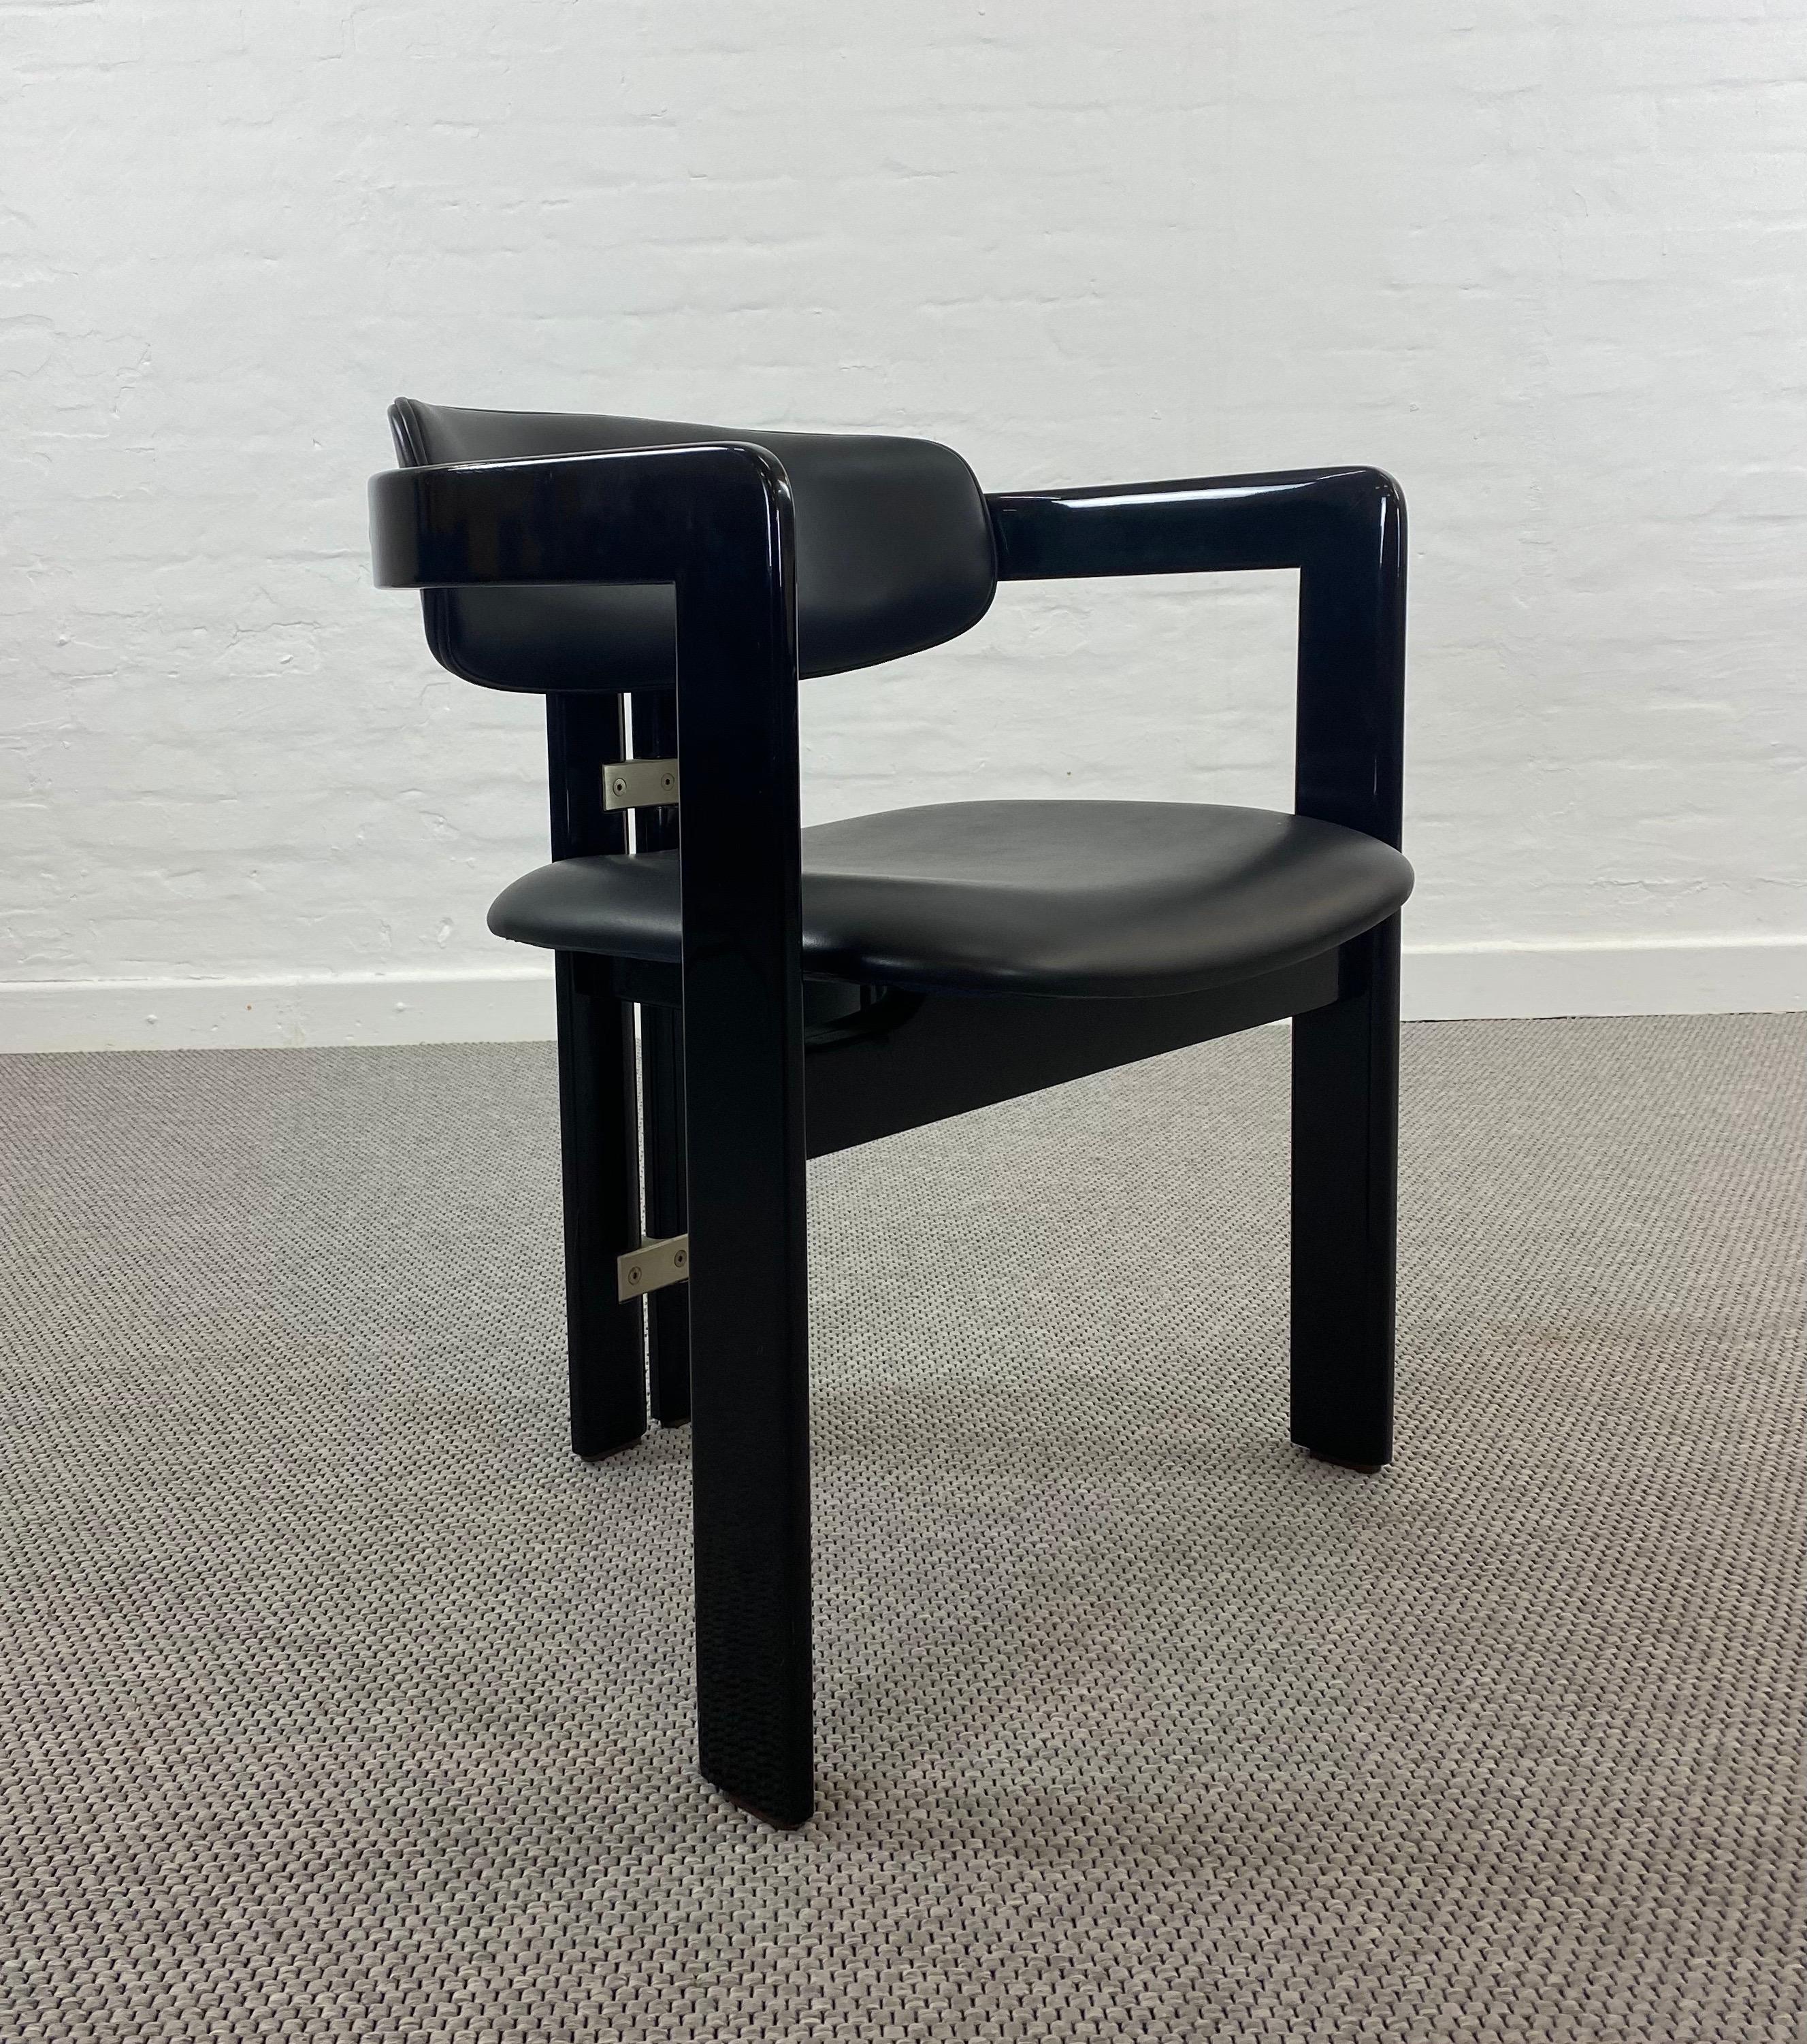 A 1960s pamplona chair from Augusto Savini for Pozzi, Italy.
This is very early and rare example of the Pamplona chair executed in lacquered hardwood and original upholstered in high quality black Leather.

 The chair is a NOS ,new old stock